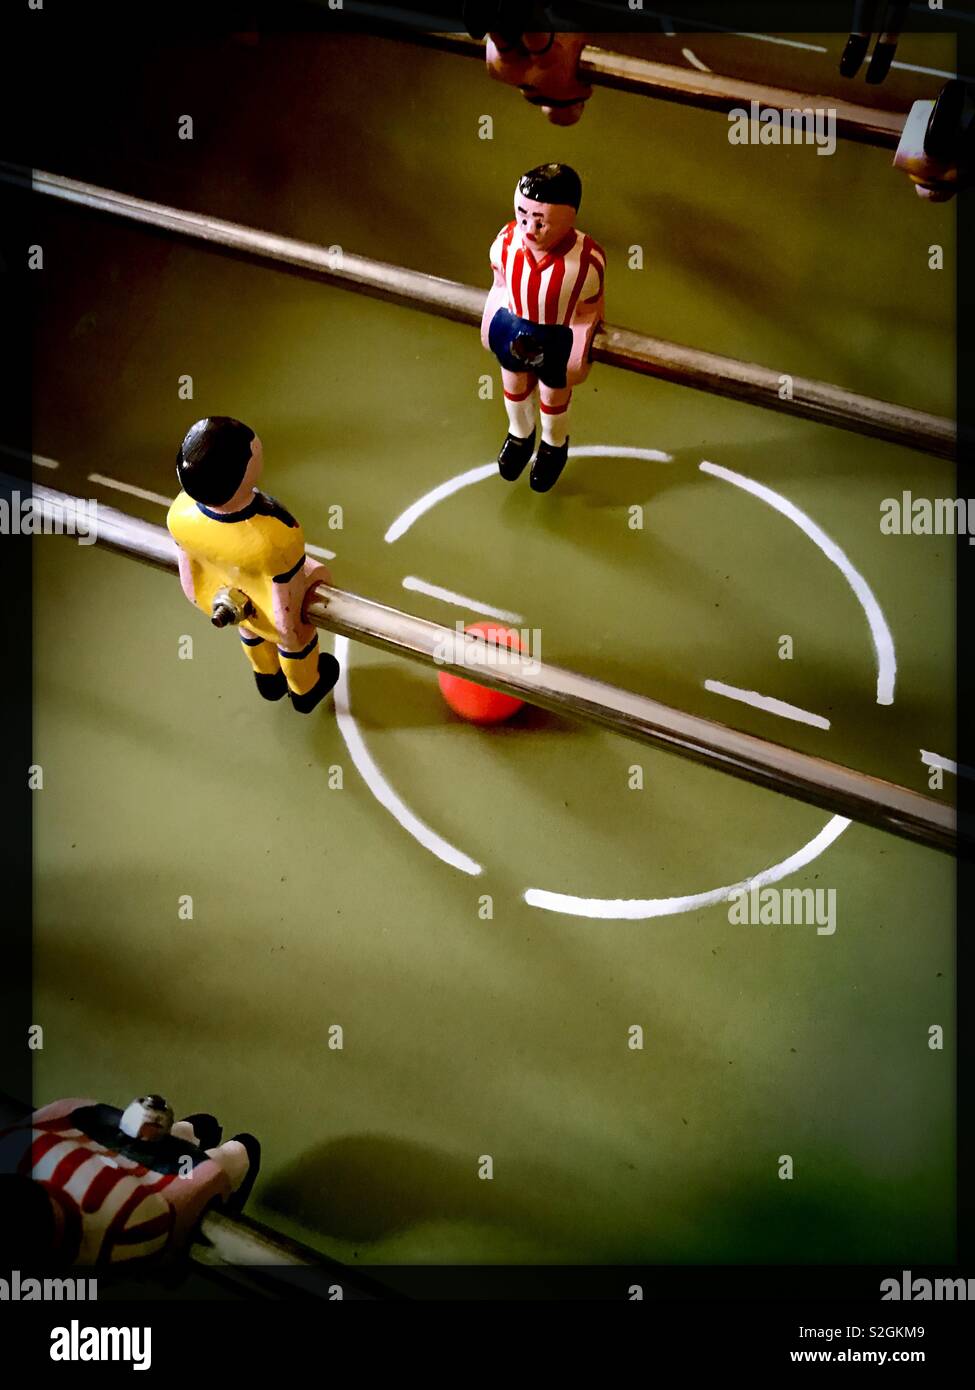 Two players, one from the Chivas and one from Club America face each other as rivals on the Mexican tabletop game of futbolitos. Stock Photo